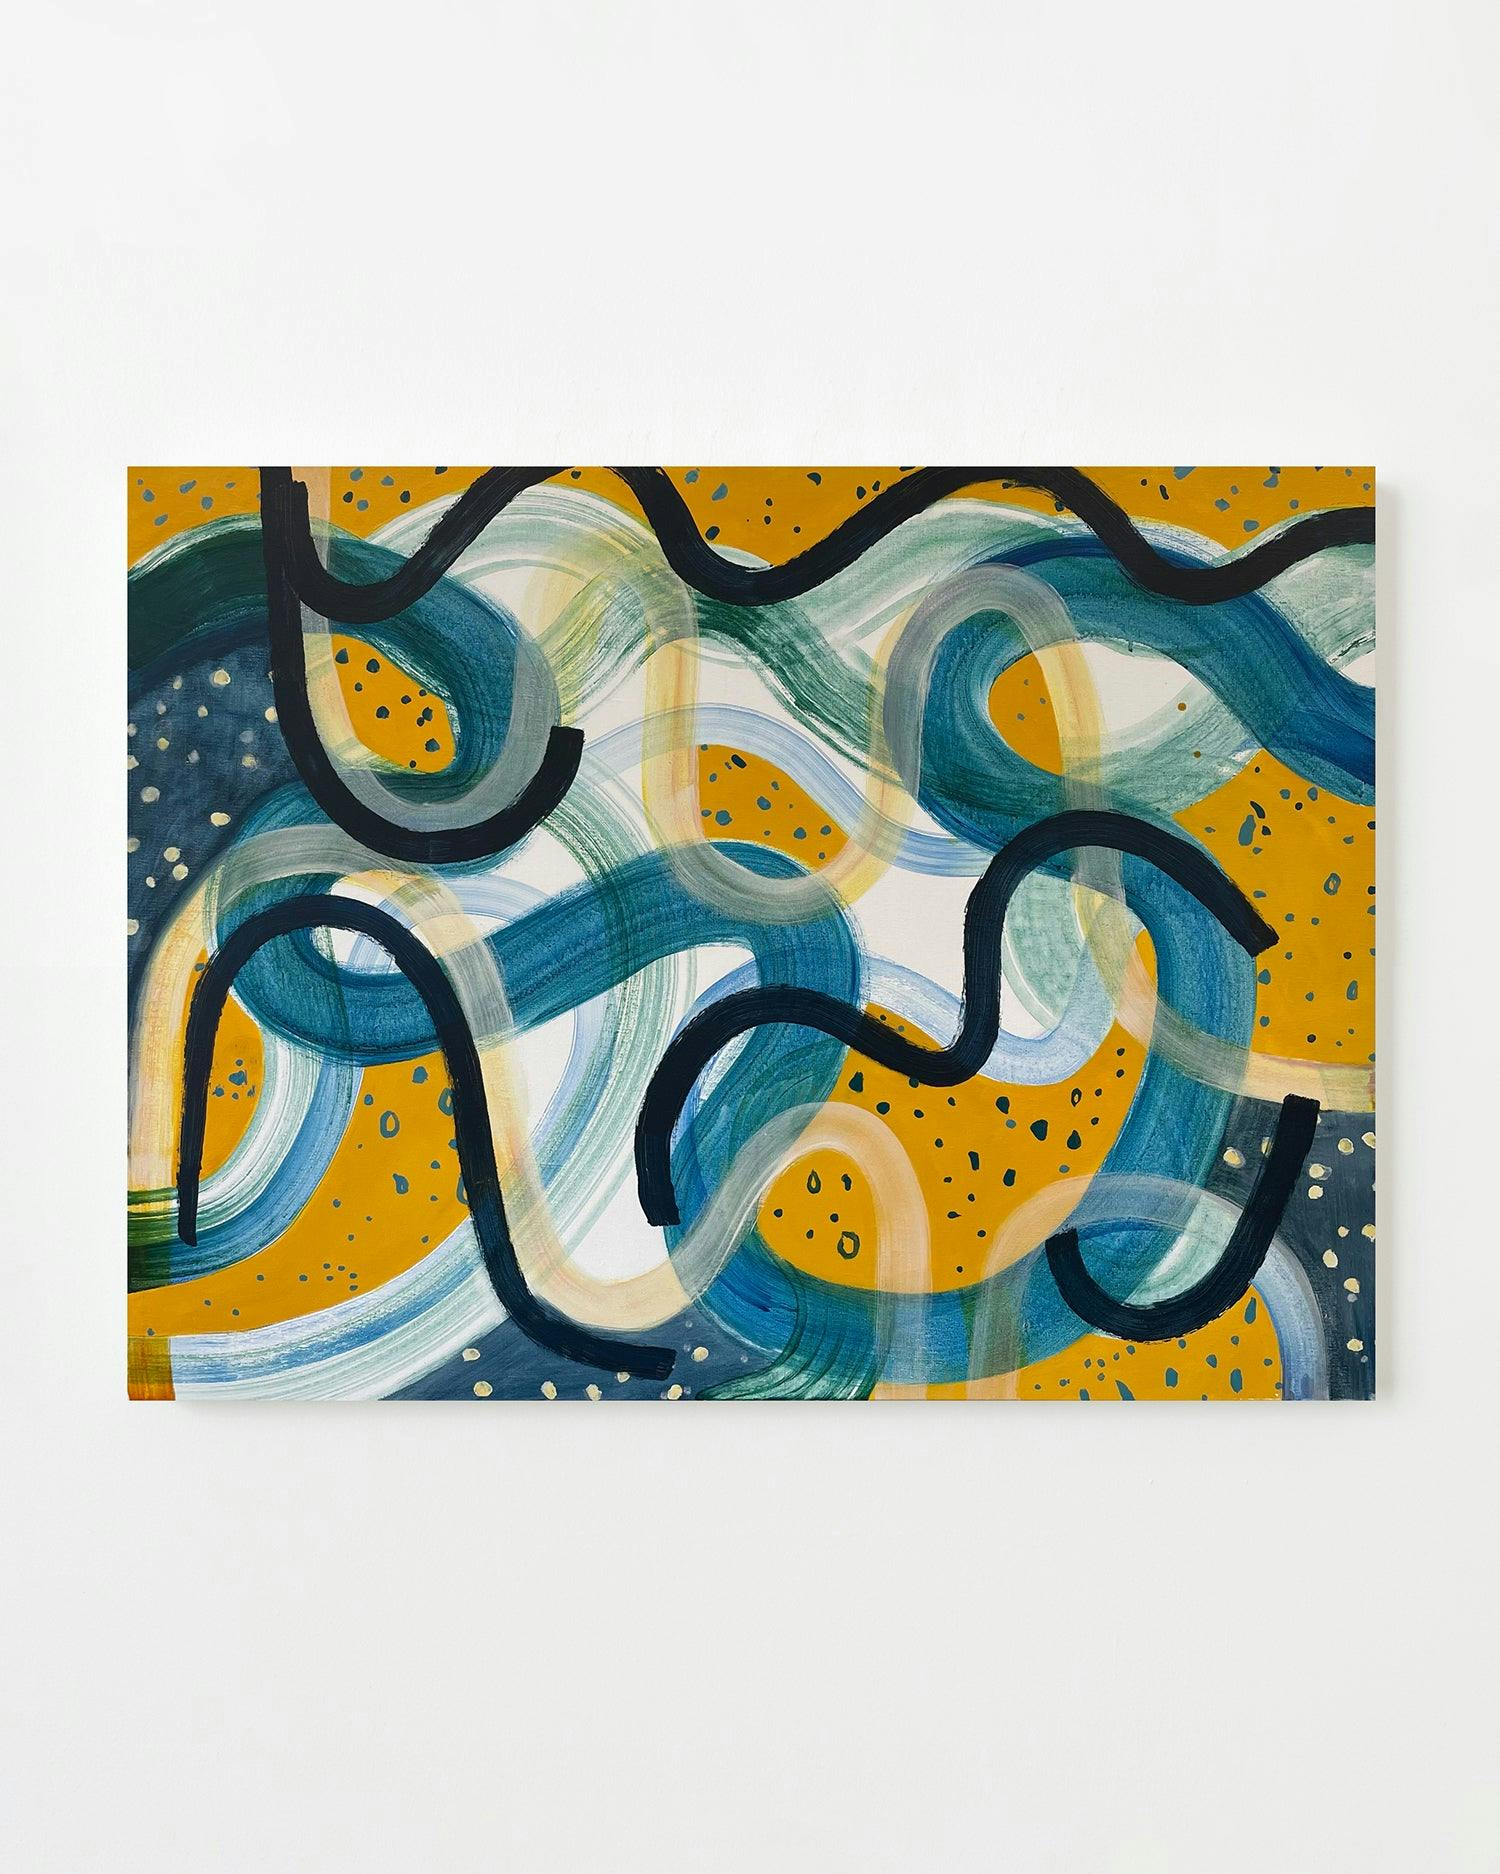 Painting by Aliza Cohen titled "Water Patterns".